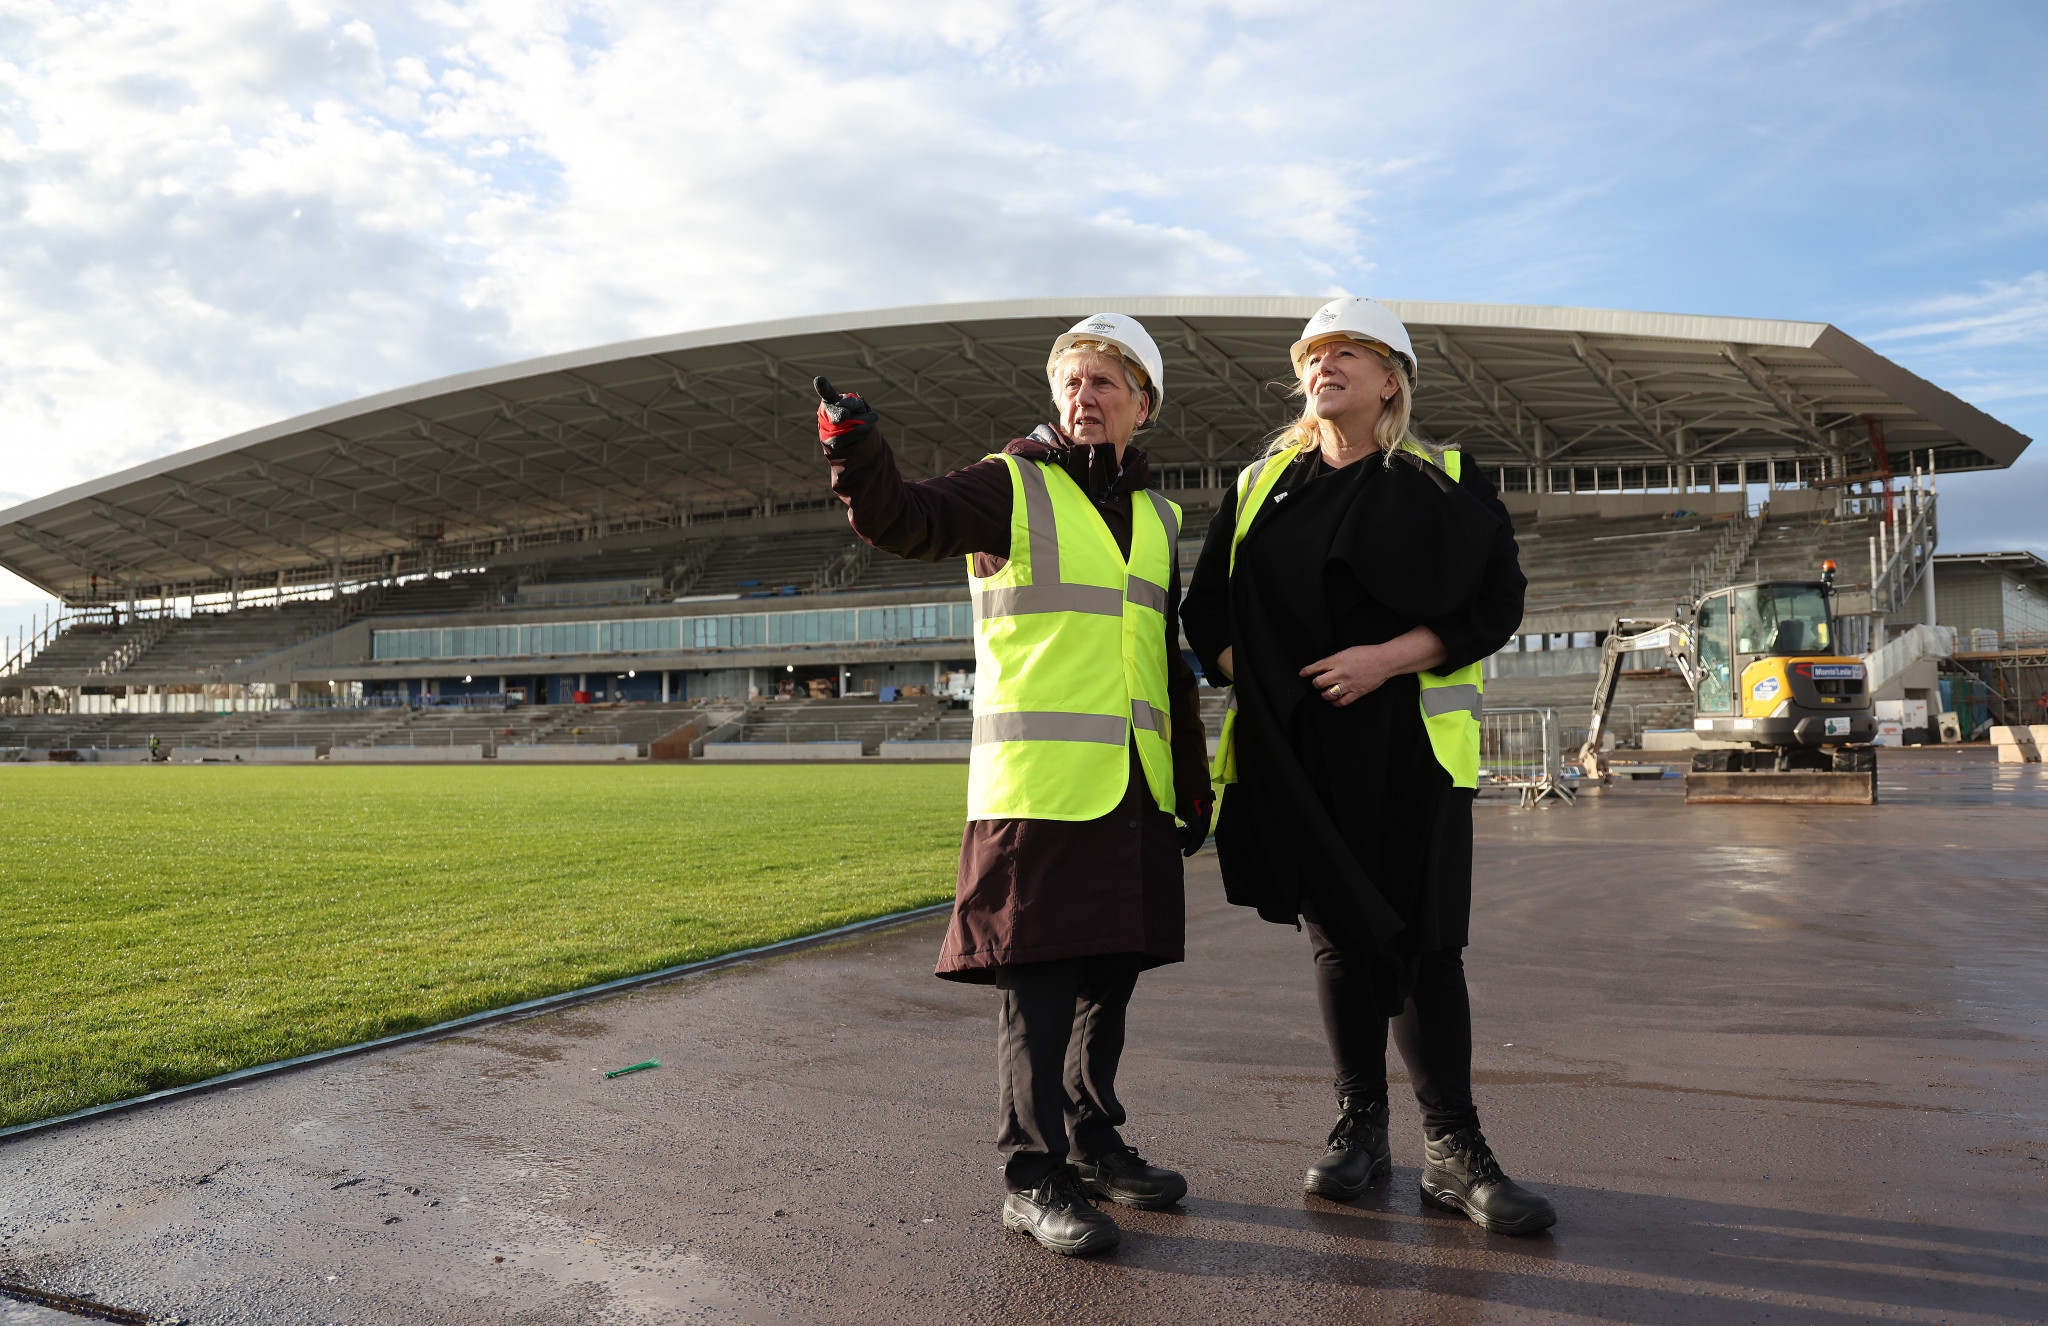 CGF President Dame Louise Martin, left, and chief executive Katie Sadleir pictured last month at the Alexander Stadium, which is set to host the Opening and Closing Ceremonies of the 2022 Commonwealth Games ©Birmingham 2022